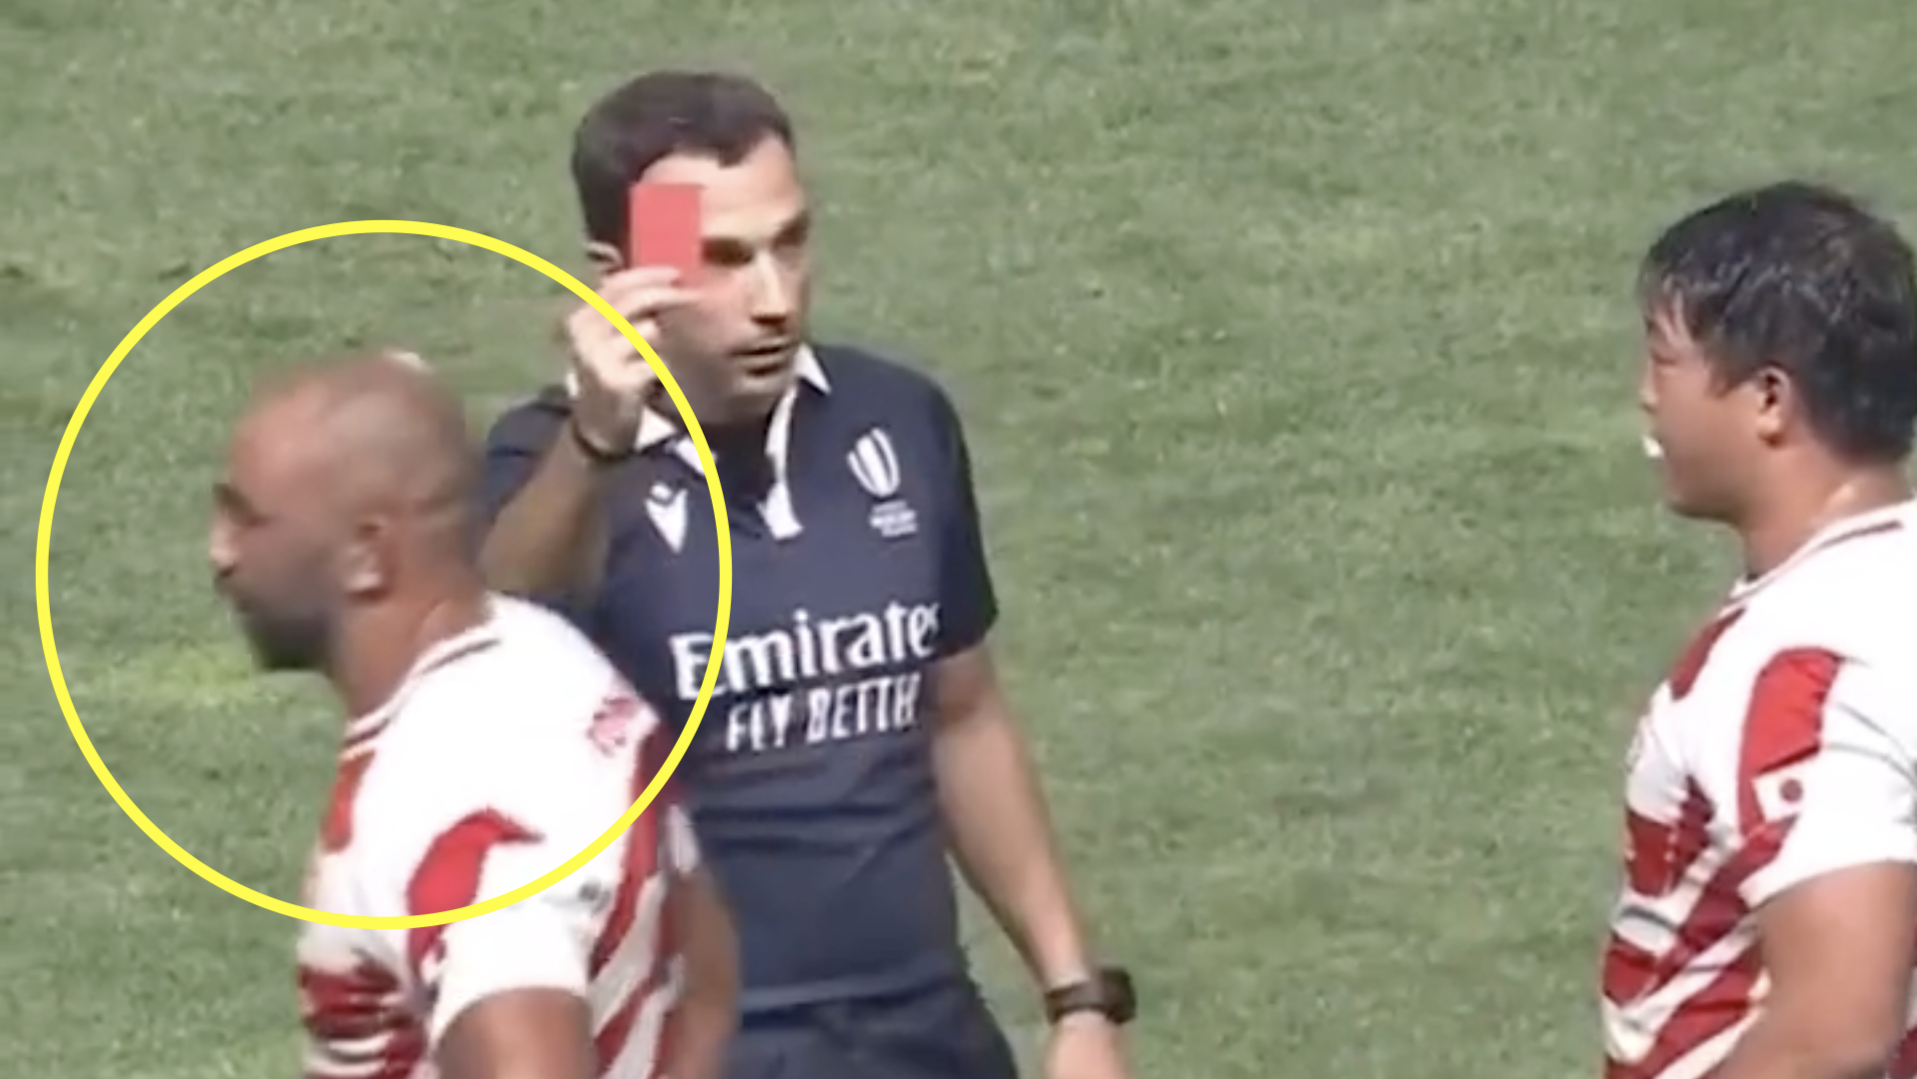 WATCH: Japan captain red carded for highly dangerous hit against Samoa